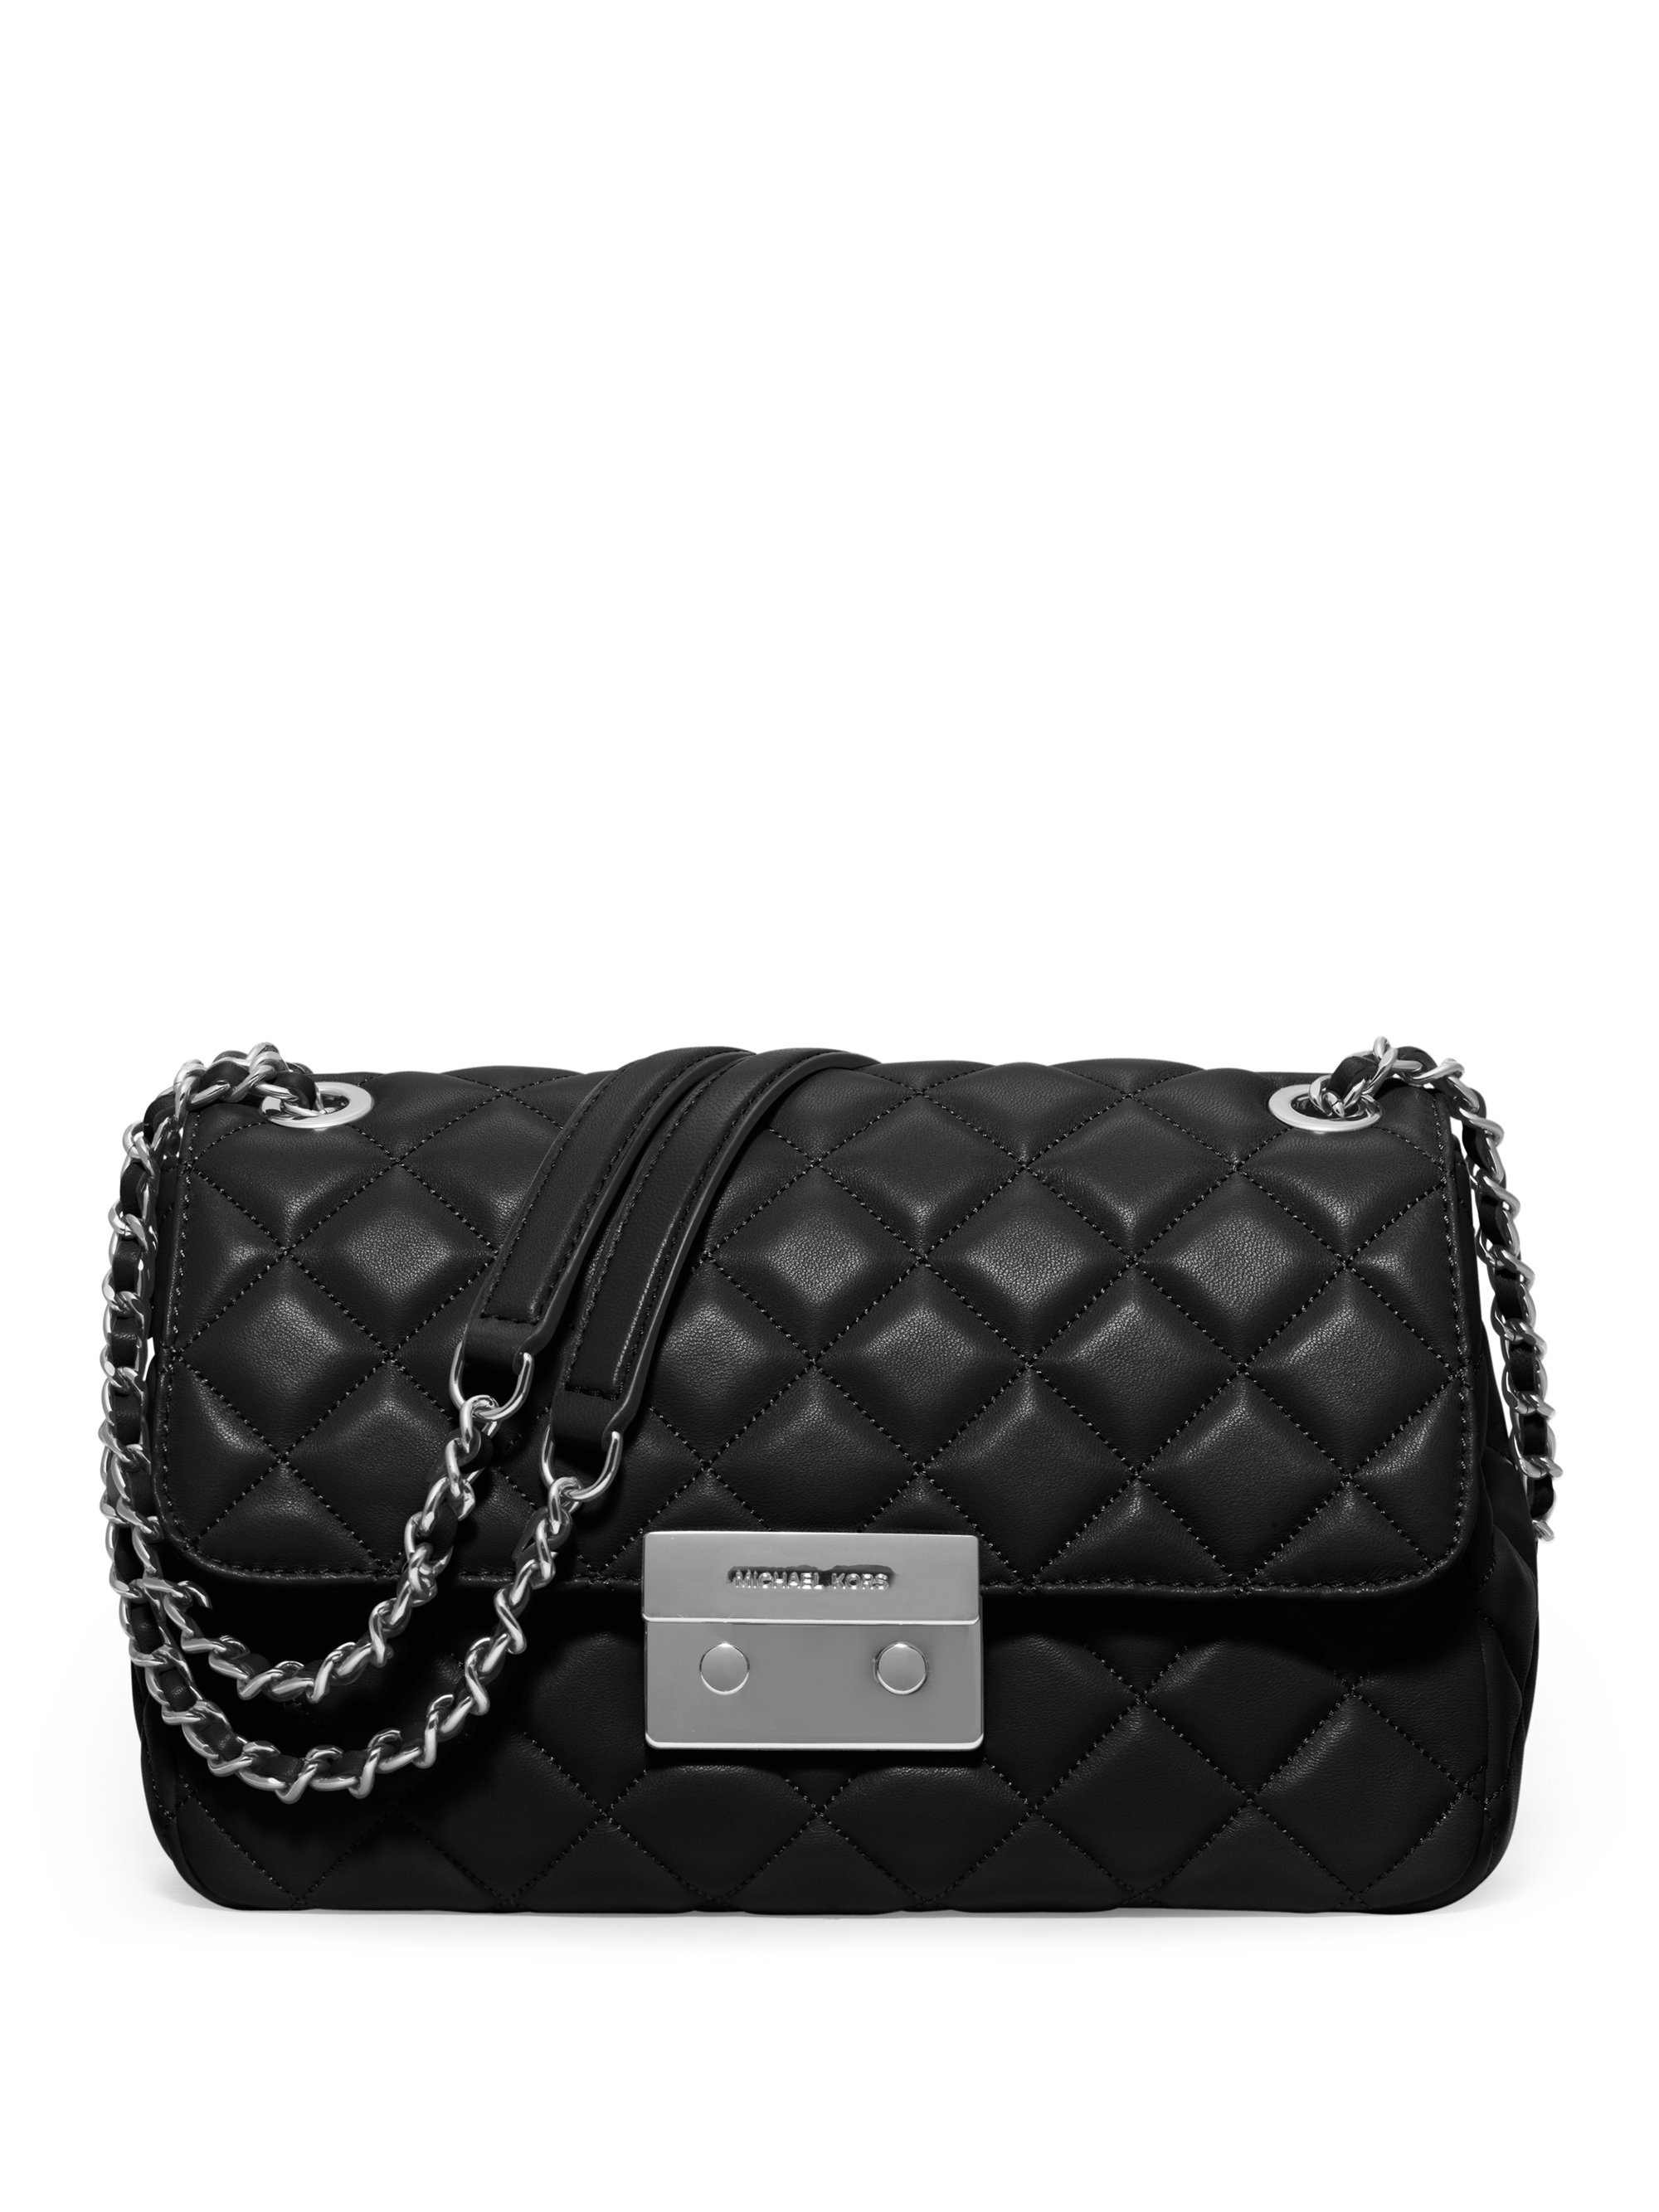 Michael Kors Sloan Large Quilted 